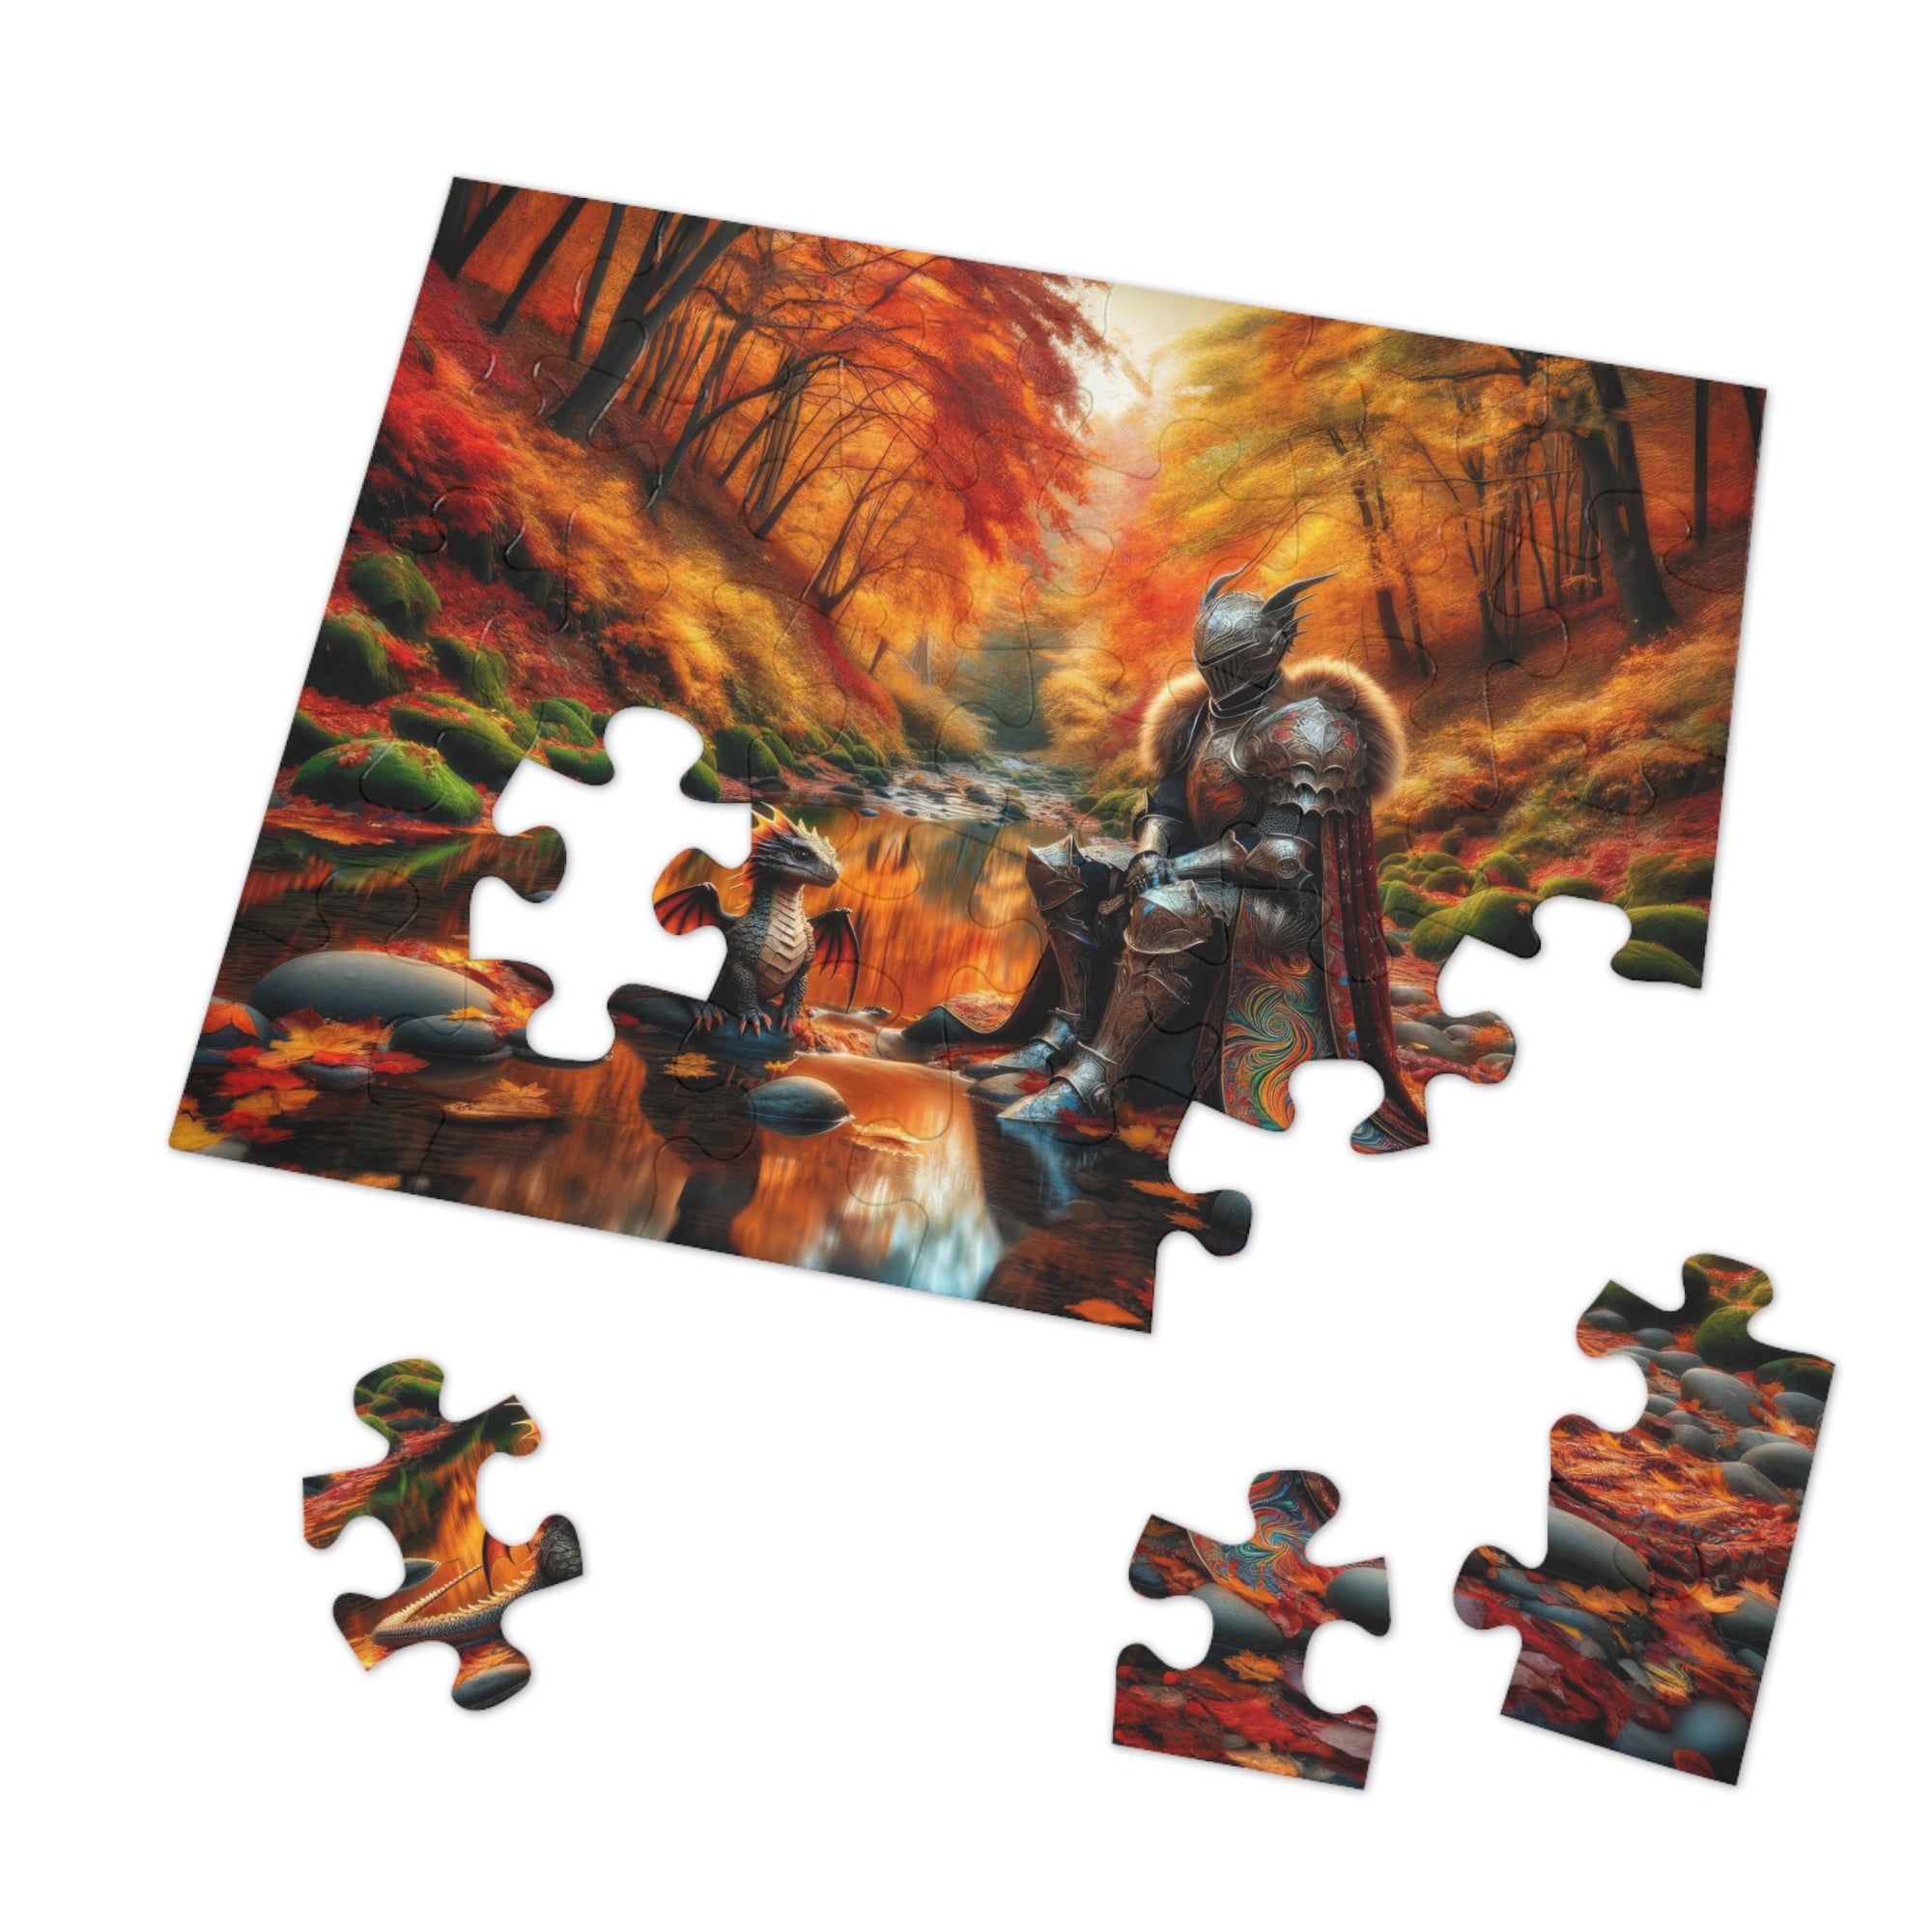 Guardian of the Autumn Realm Jigsaw Puzzle